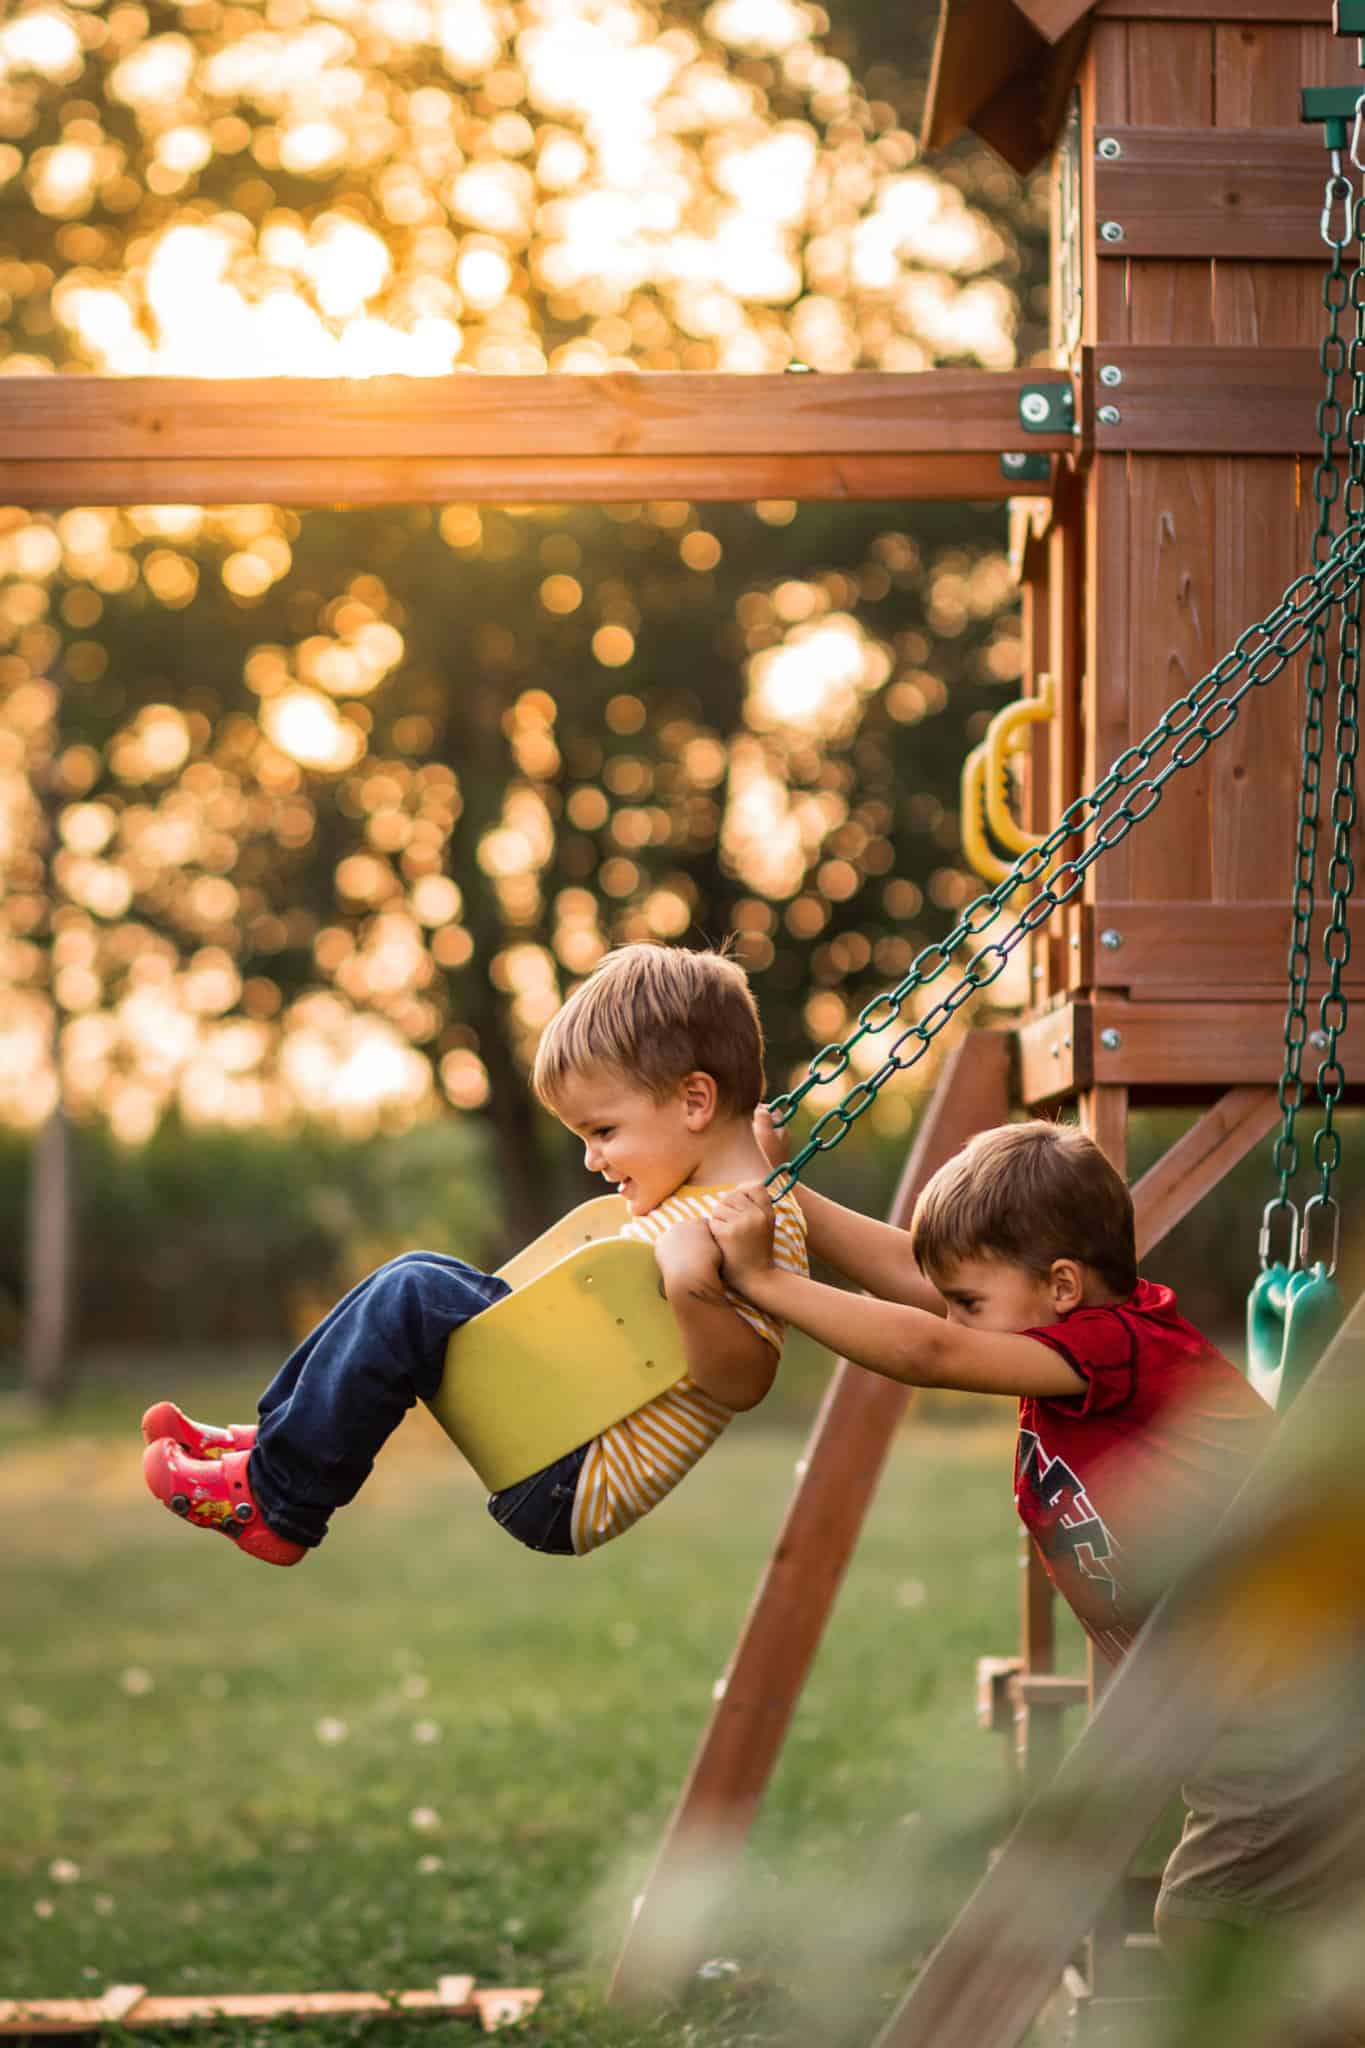 Boy in red pushing boy in yellow on a yellow swing